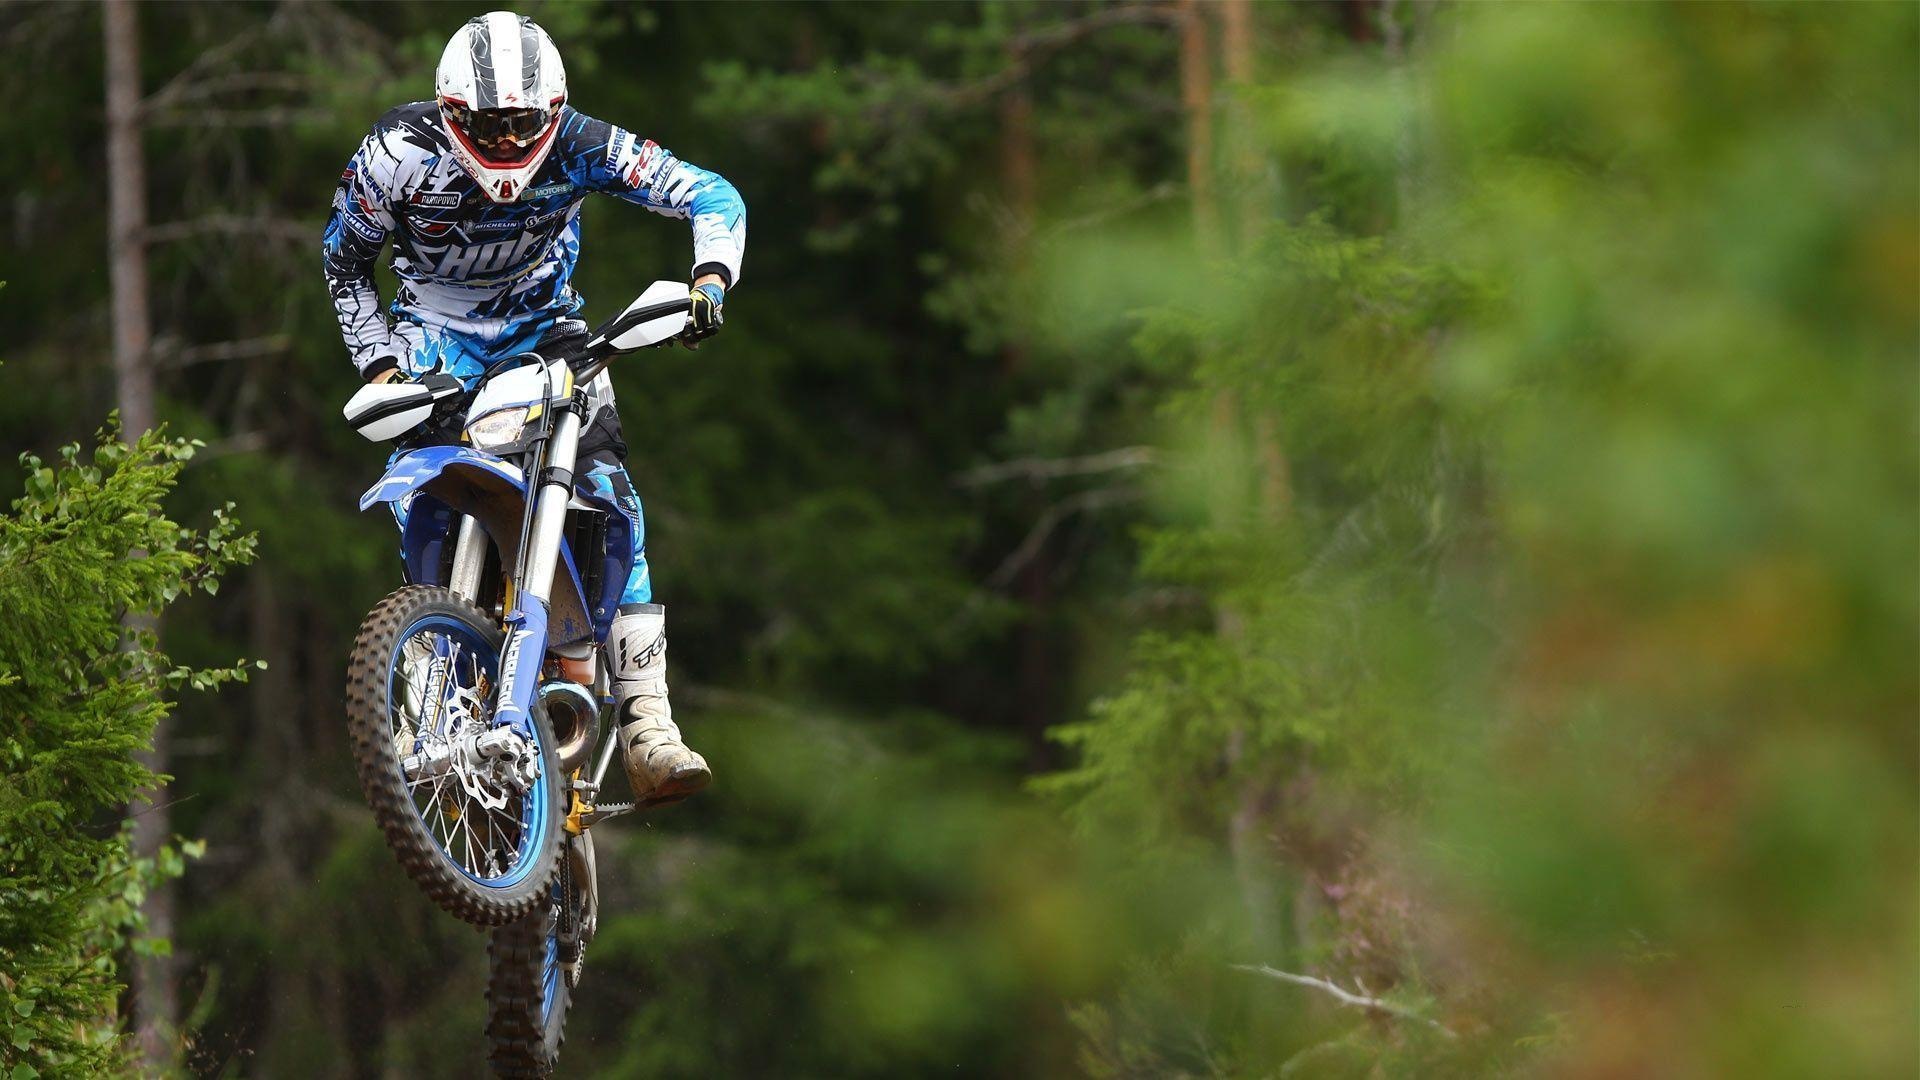 Stunt: Motocross in the forest, Off-road stunting motorcycle sport. 1920x1080 Full HD Wallpaper.